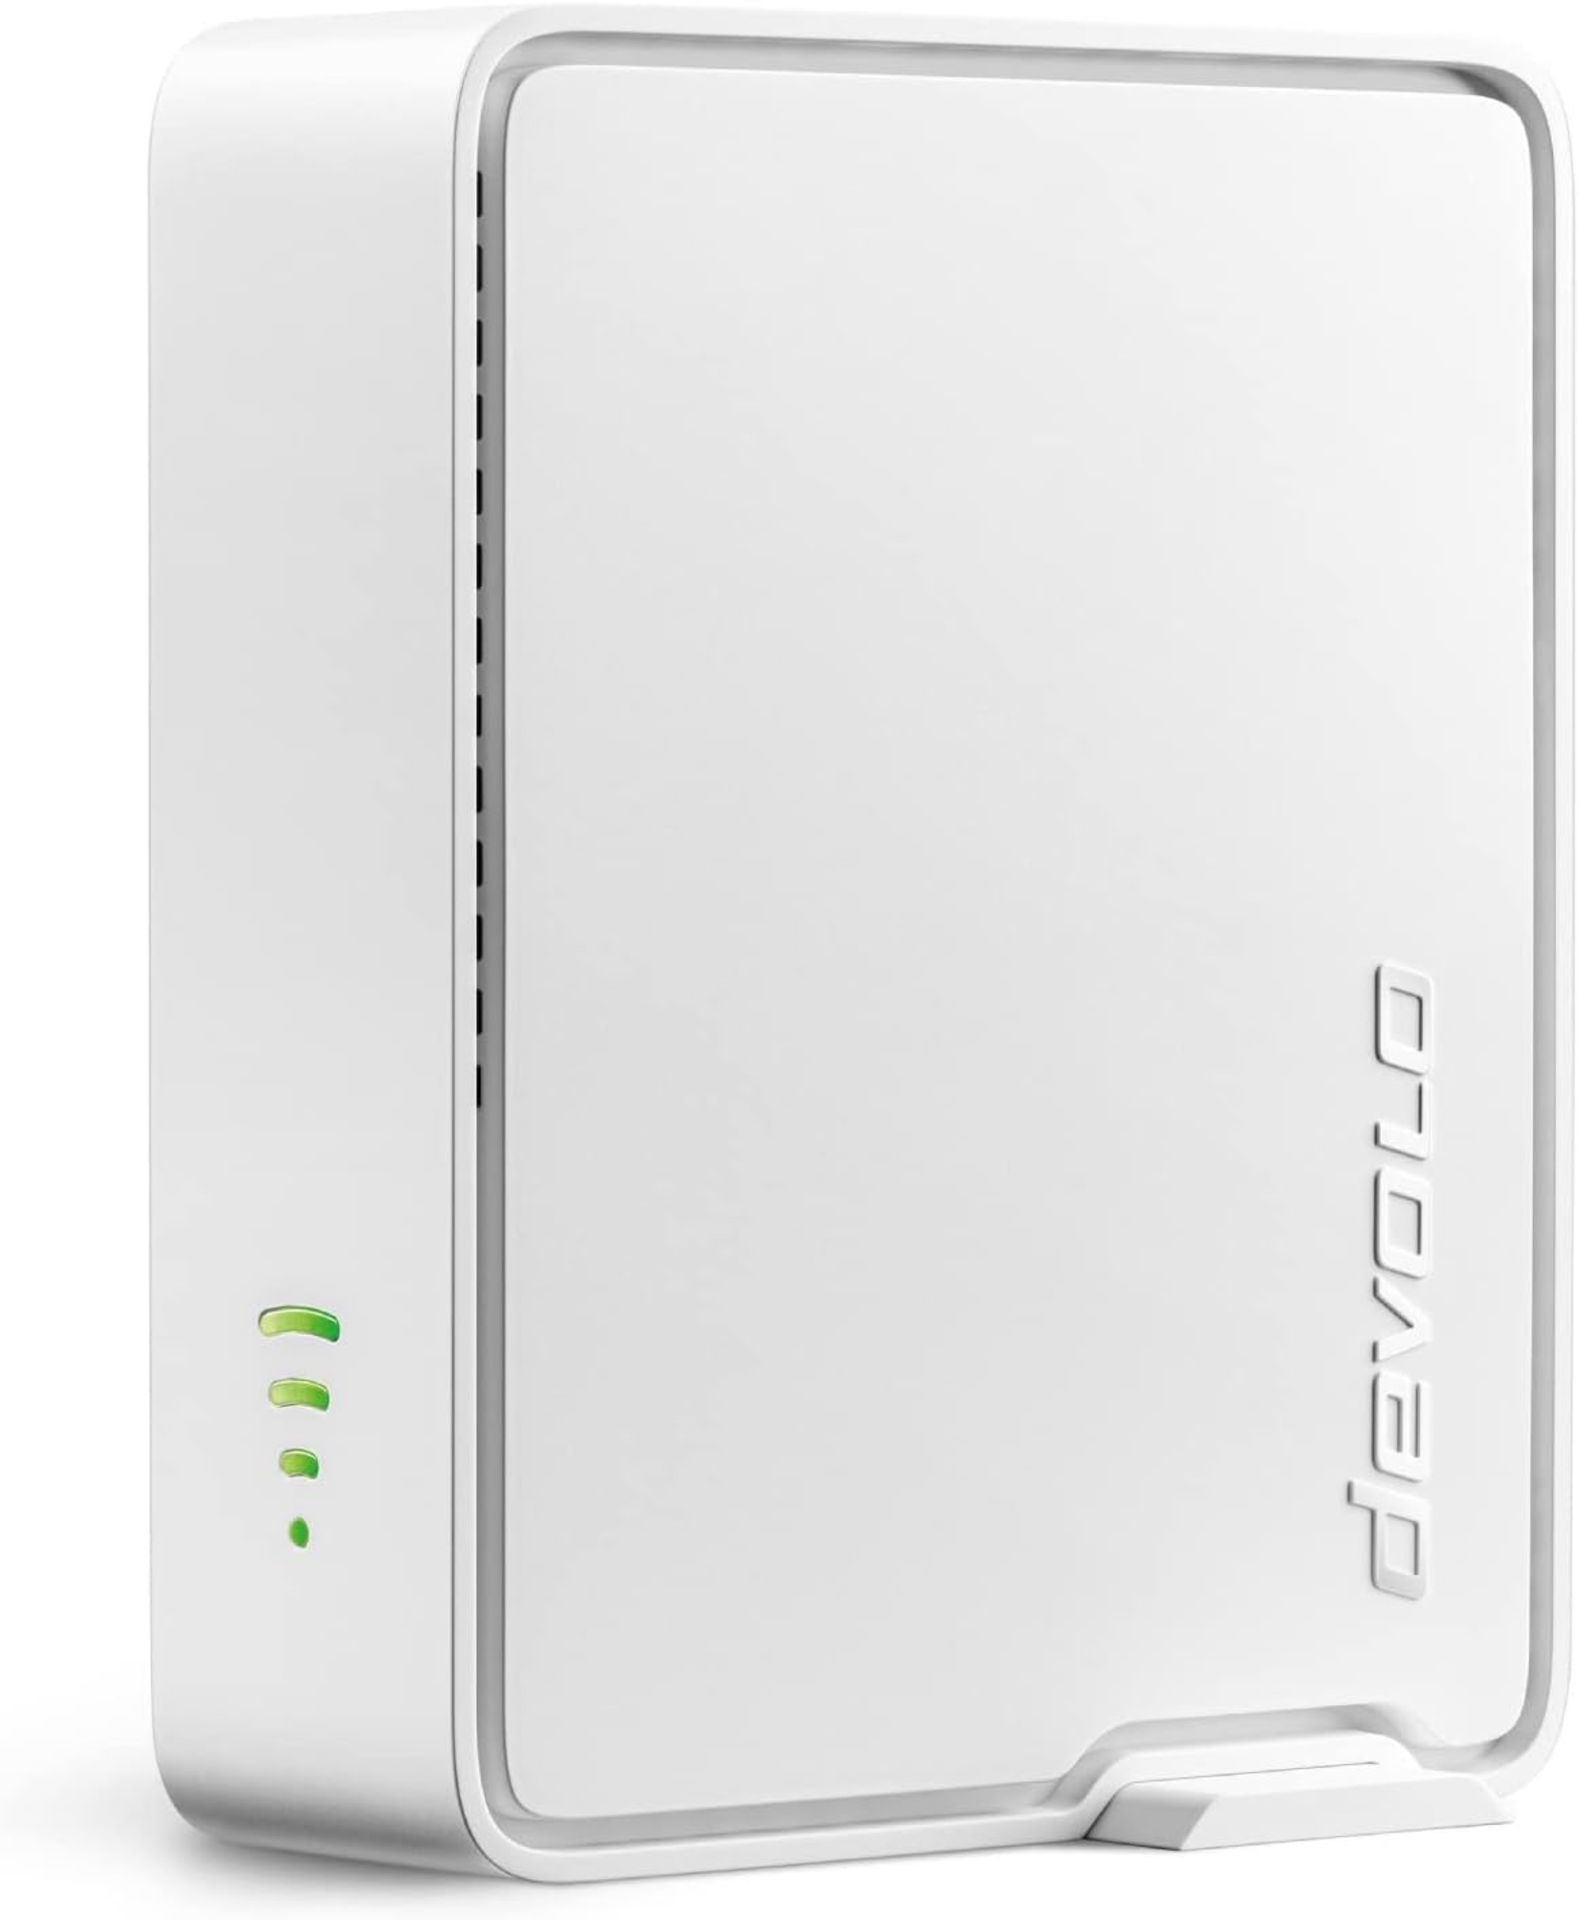 NEW & BOXED DEVOLO WiFi 6 repeater 5400. RRP £150.70. FOR ALL DEVICES: Whether you're using a